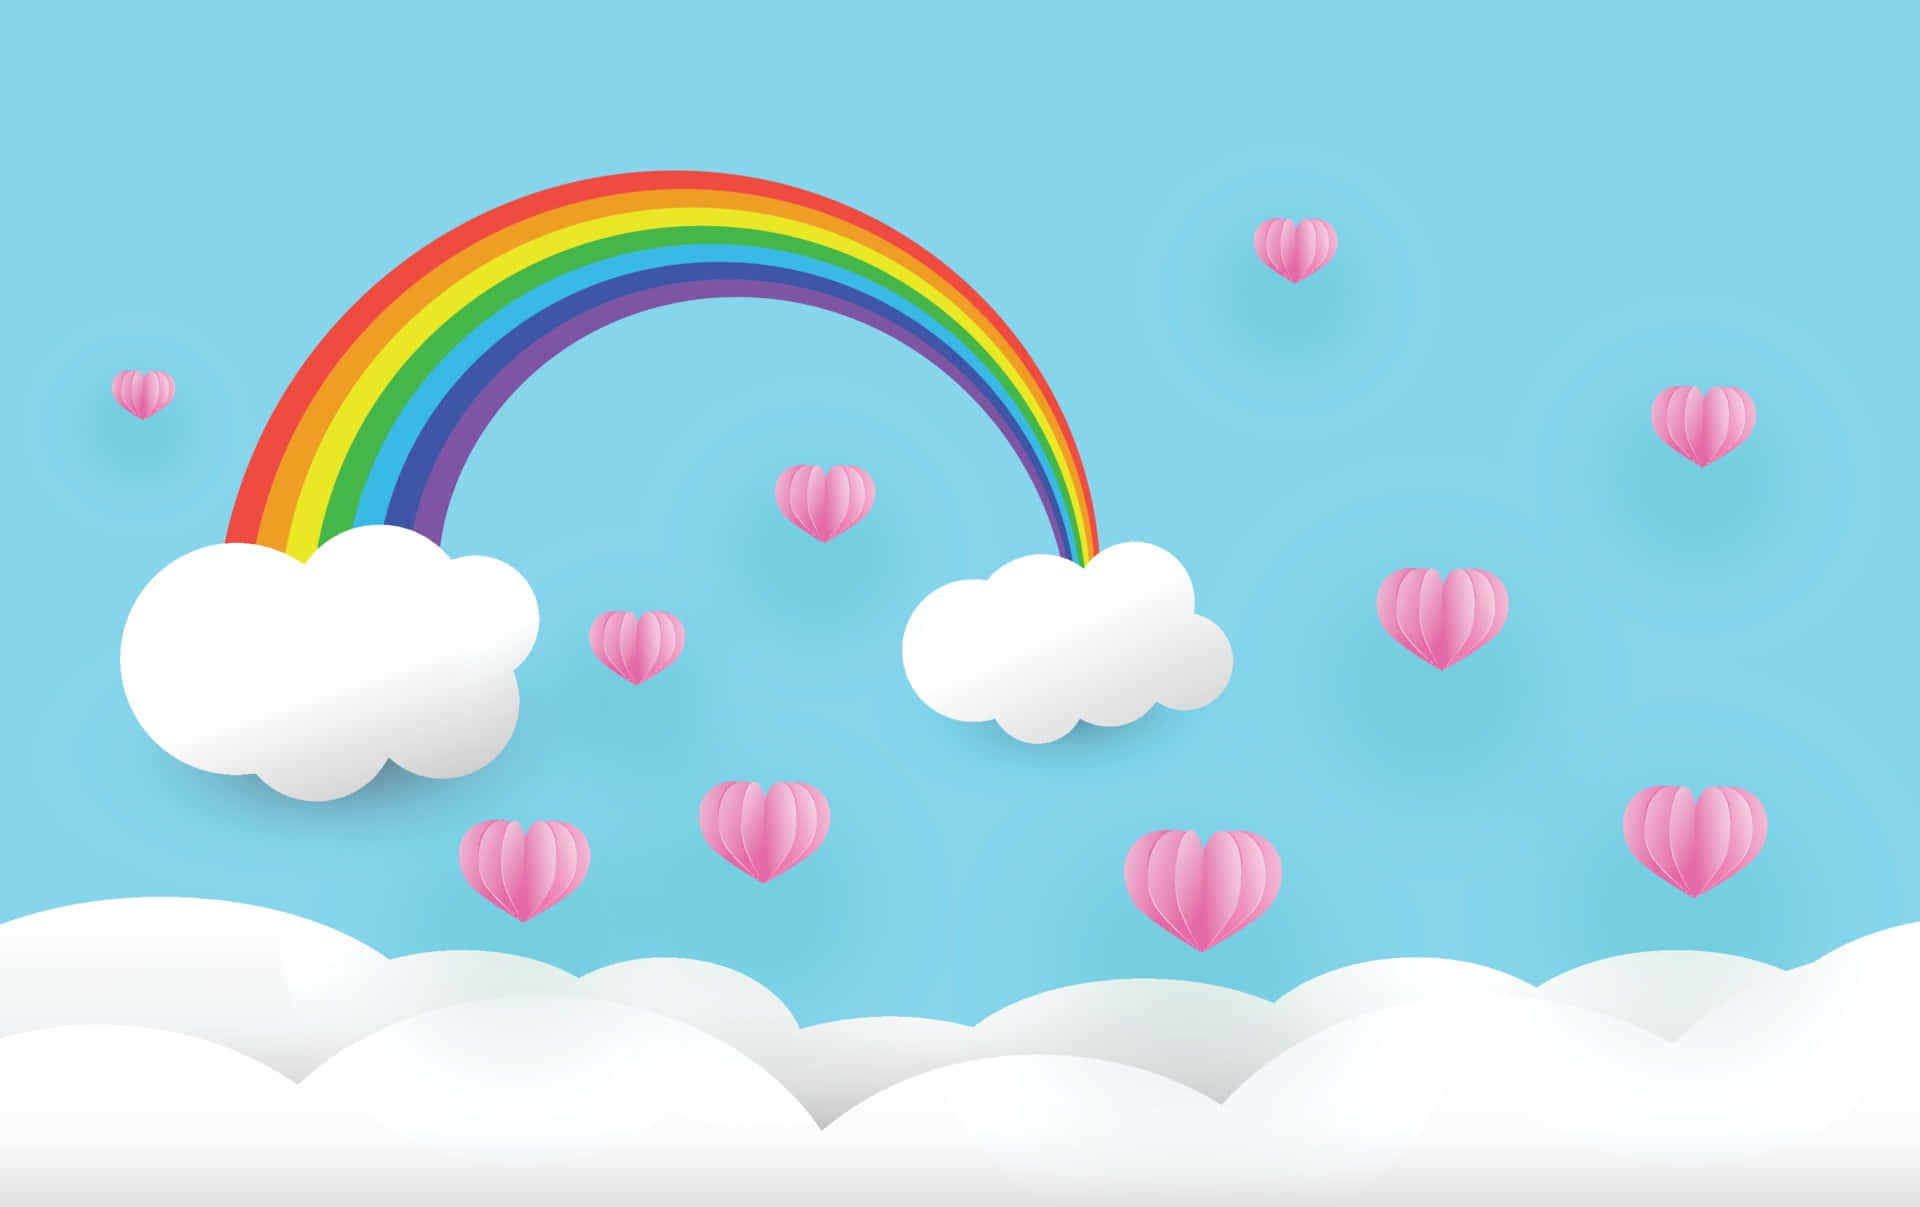 Spread Happiness And Love With This Vibrant Cute Rainbow Painting!